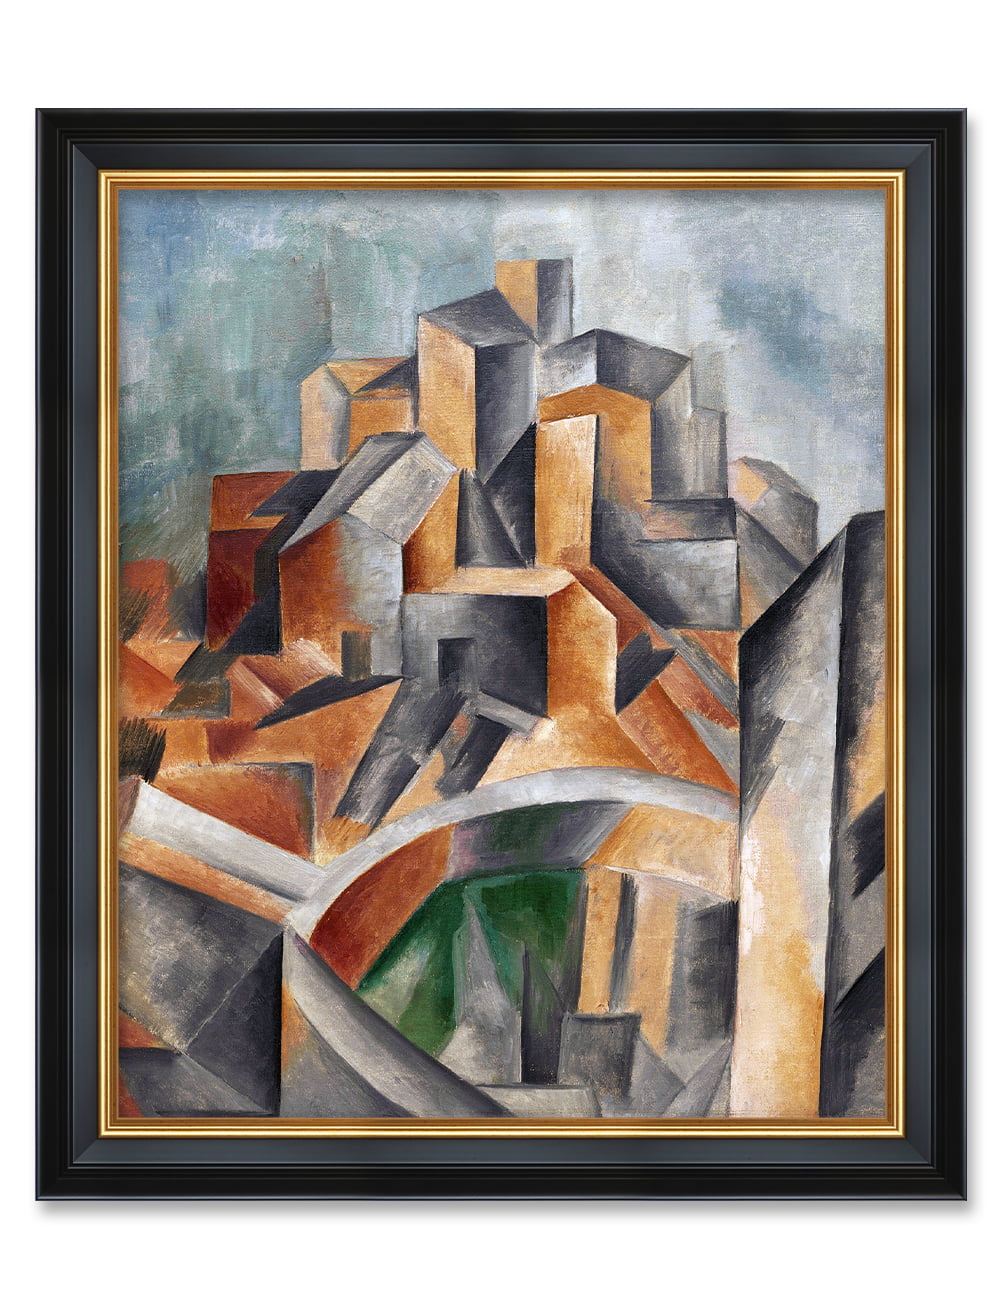 DECORARTS Houses on the Hill by Pablo Picasso, Giclee Print on Acid Free  Canvas with Matching Solid Wood Frame, Framed Artwork for Wall Decor. Total  Framed Size: W 23.25